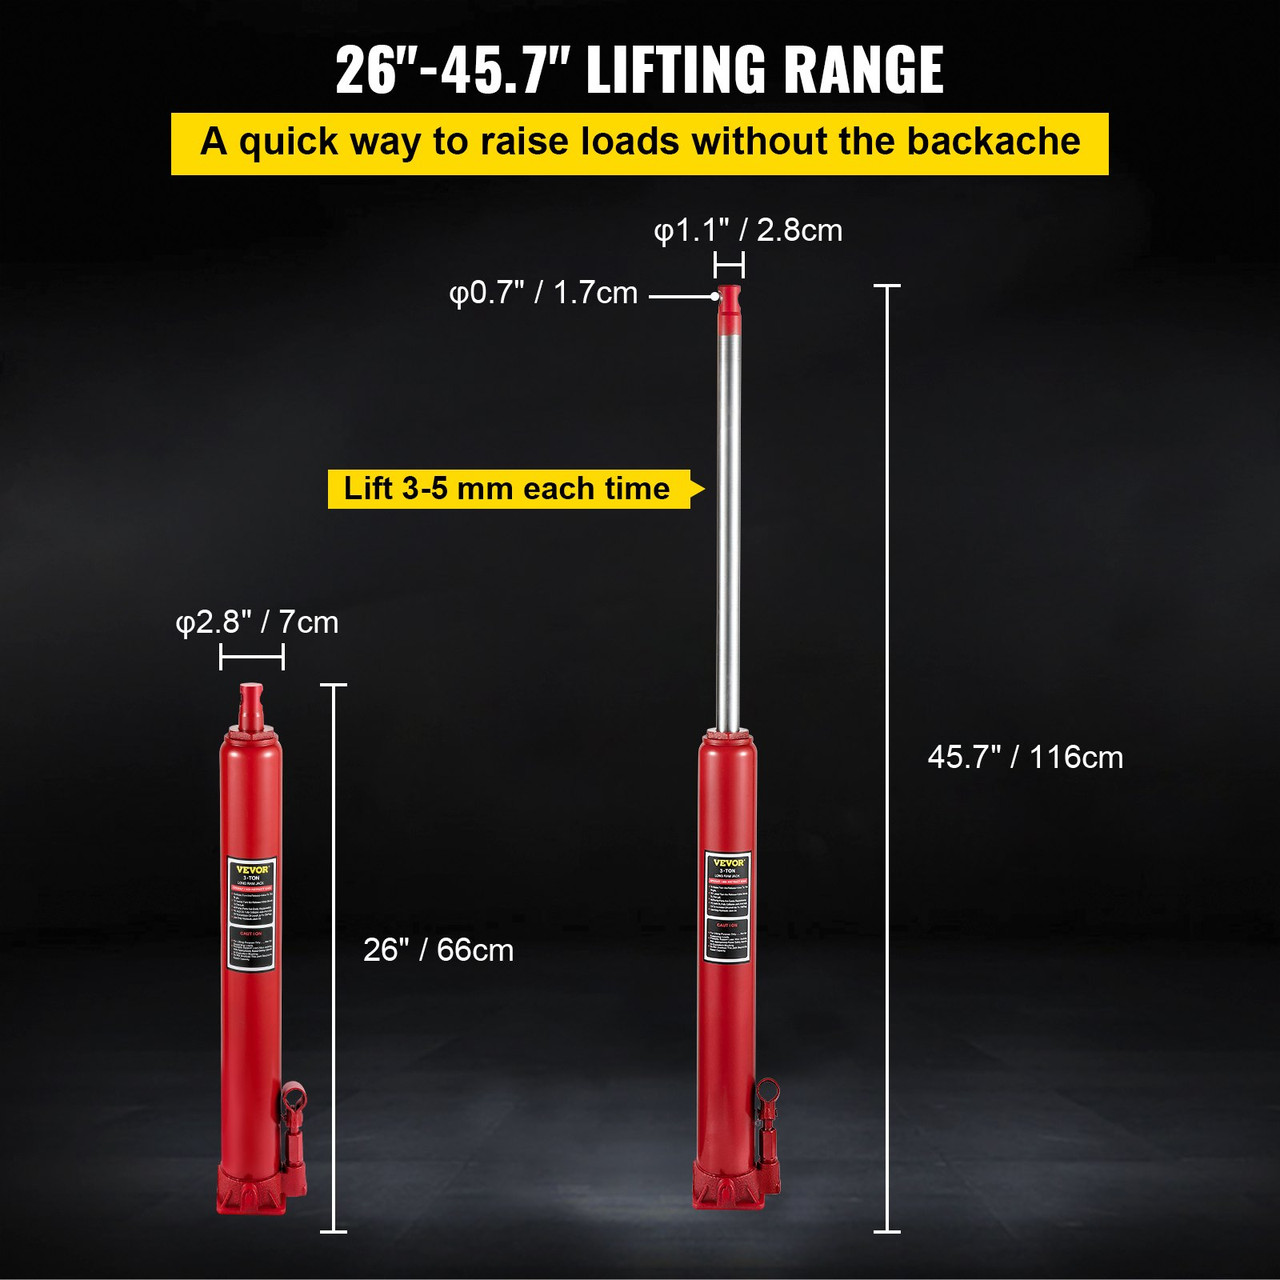 Hydraulic Long Ram Jack, 3 Tons/6600 lbs Capacity, with Single Piston Pump and Flat Base, Manual Cherry Picker w/Handle, for Garage/Shop Cranes, Engine Lift Hoist, Red